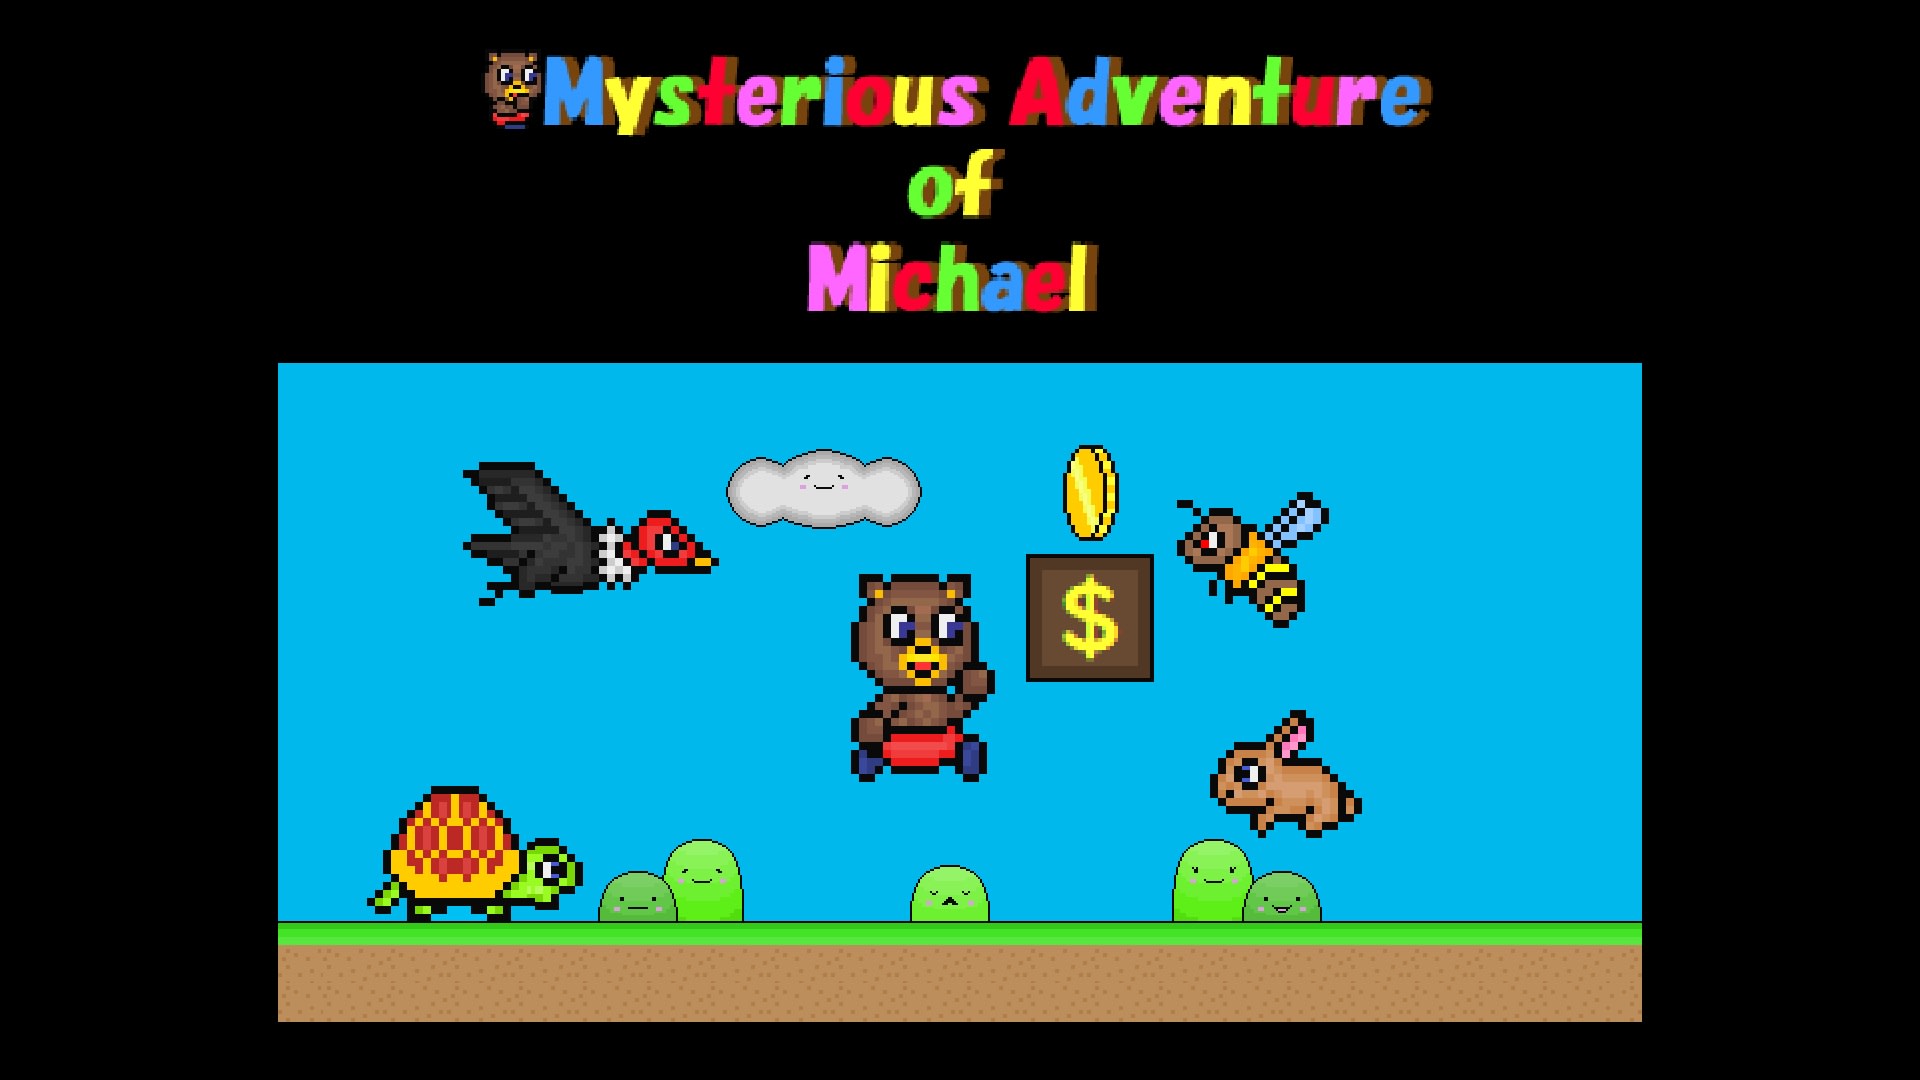 Mysterious Adventure of Michael